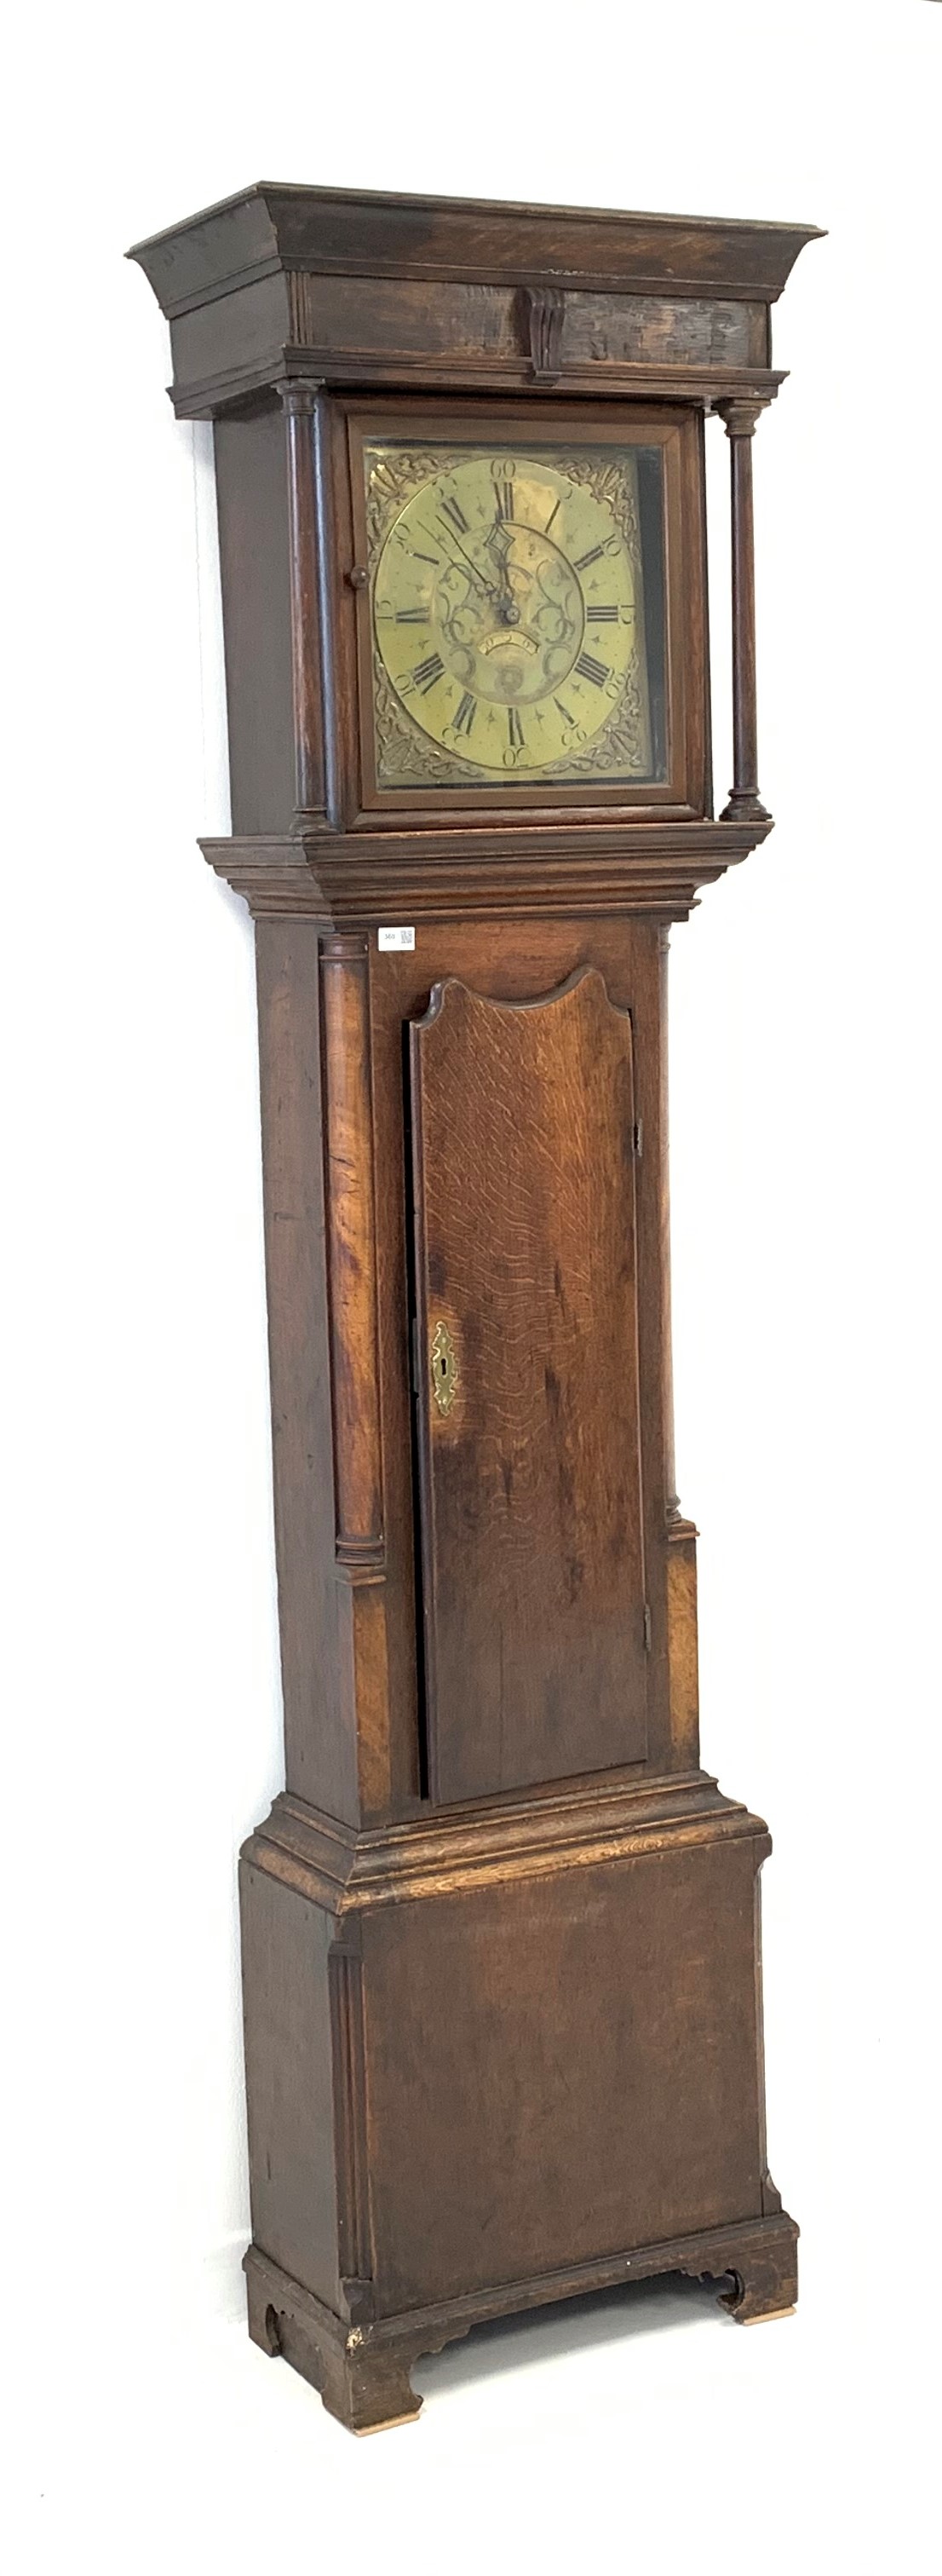 George III oak longcase clock, plain frieze with moulded detail above two plain tapered pilasters, - Image 3 of 8